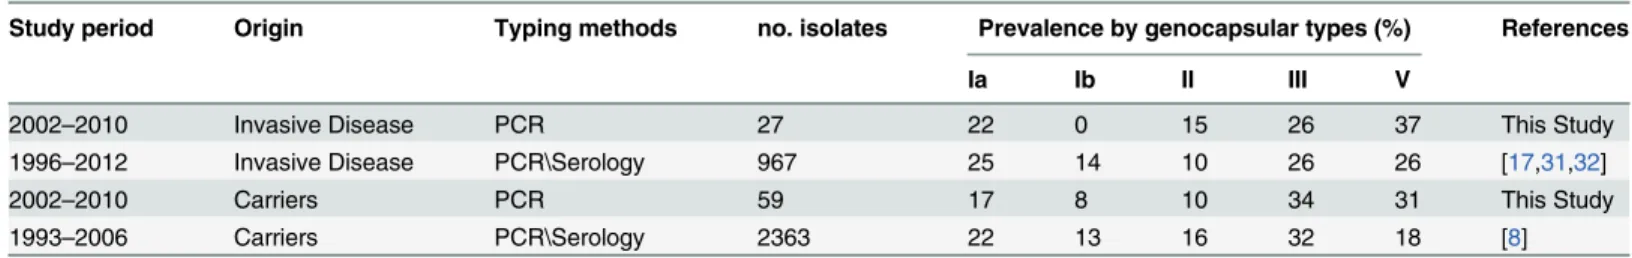 Table 1. Relative frequency of capsular genotypes Ia, Ib, II, III and V among our collection of NT isolates and in encapsulated GBS strains obtained from adults in Europe.